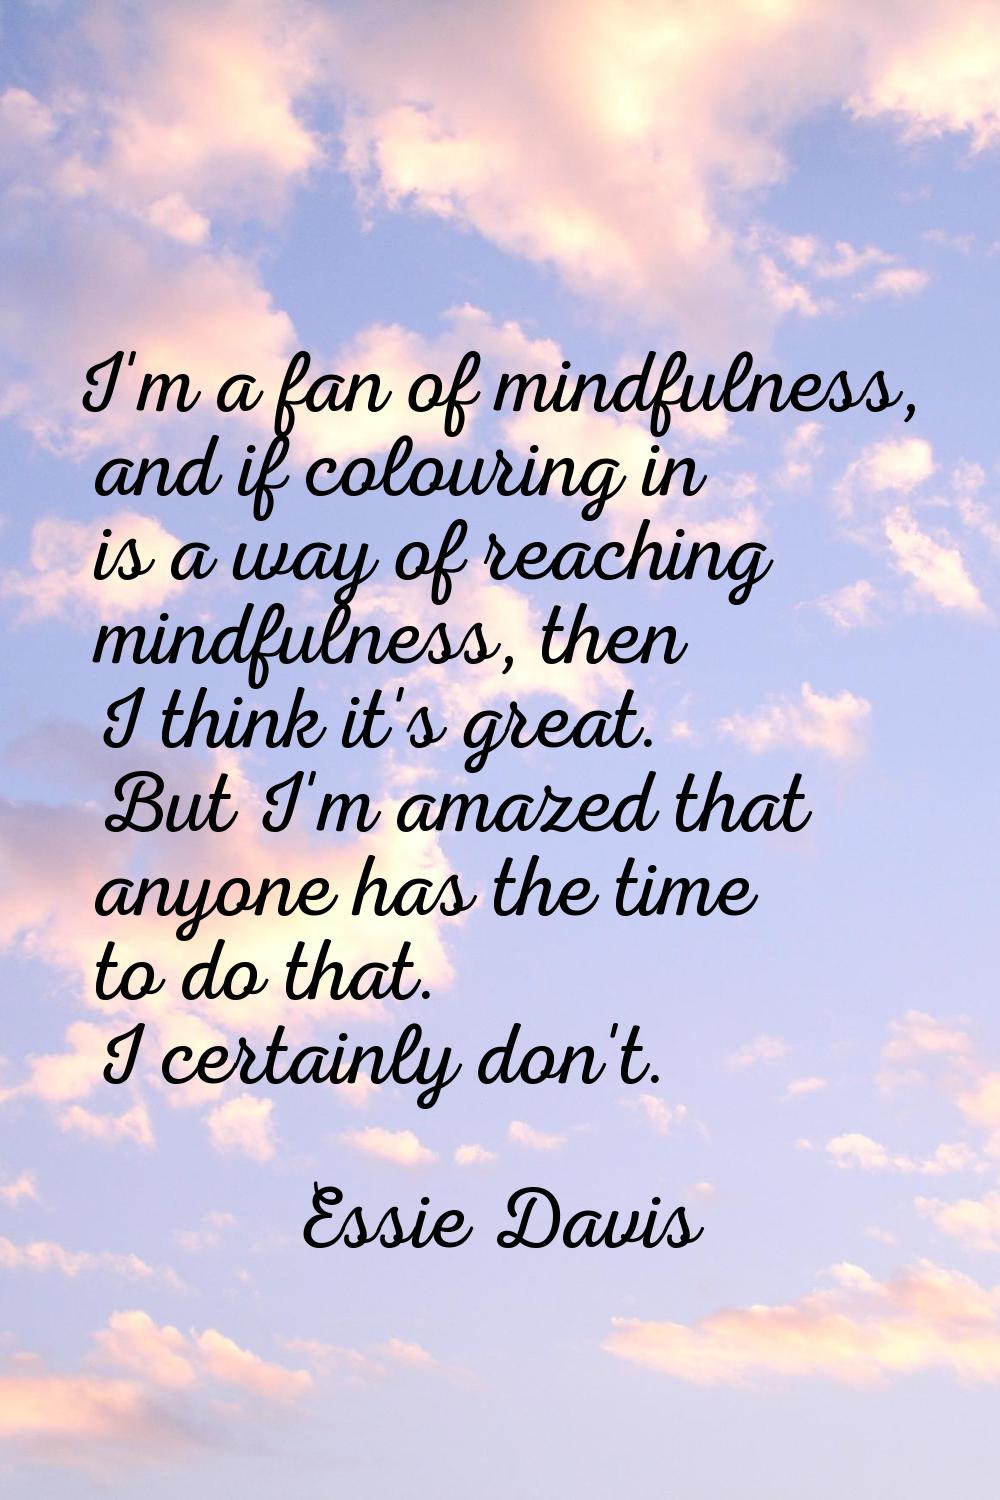 I'm a fan of mindfulness, and if colouring in is a way of reaching mindfulness, then I think it's g